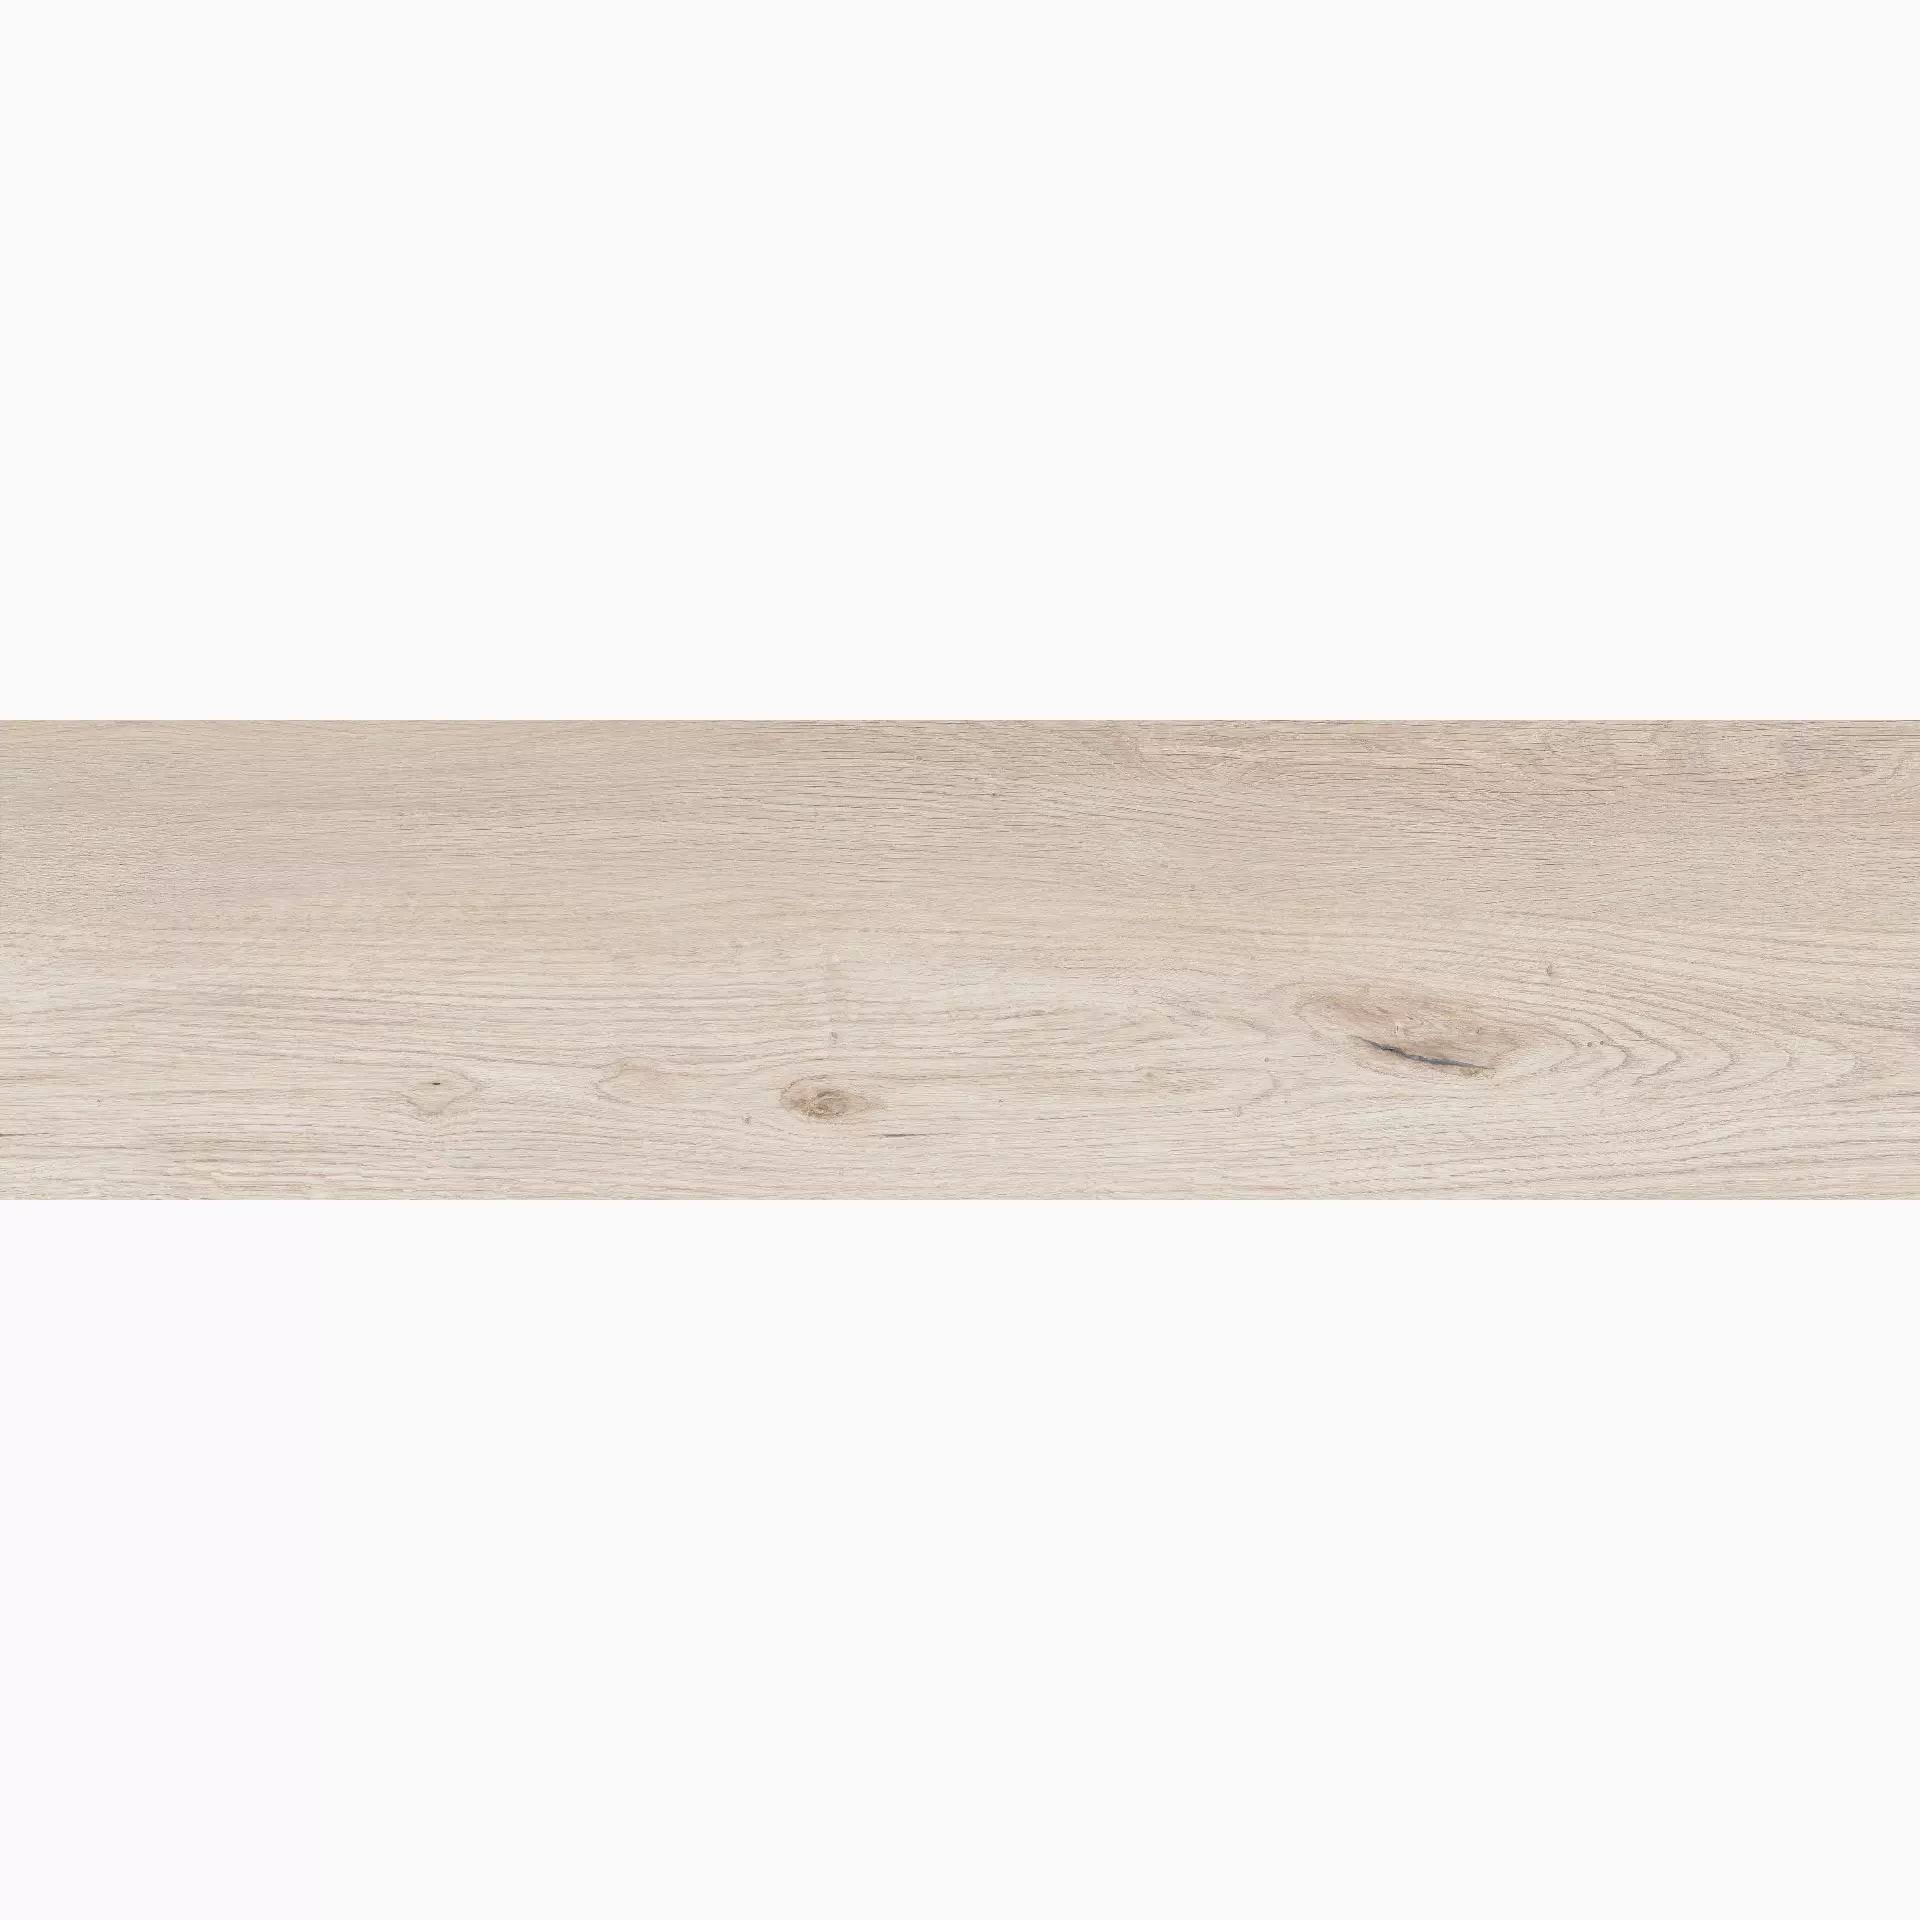 Flaviker Four Seasons Biscuit Naturale PF60011808 30x120cm rectified 8,5mm